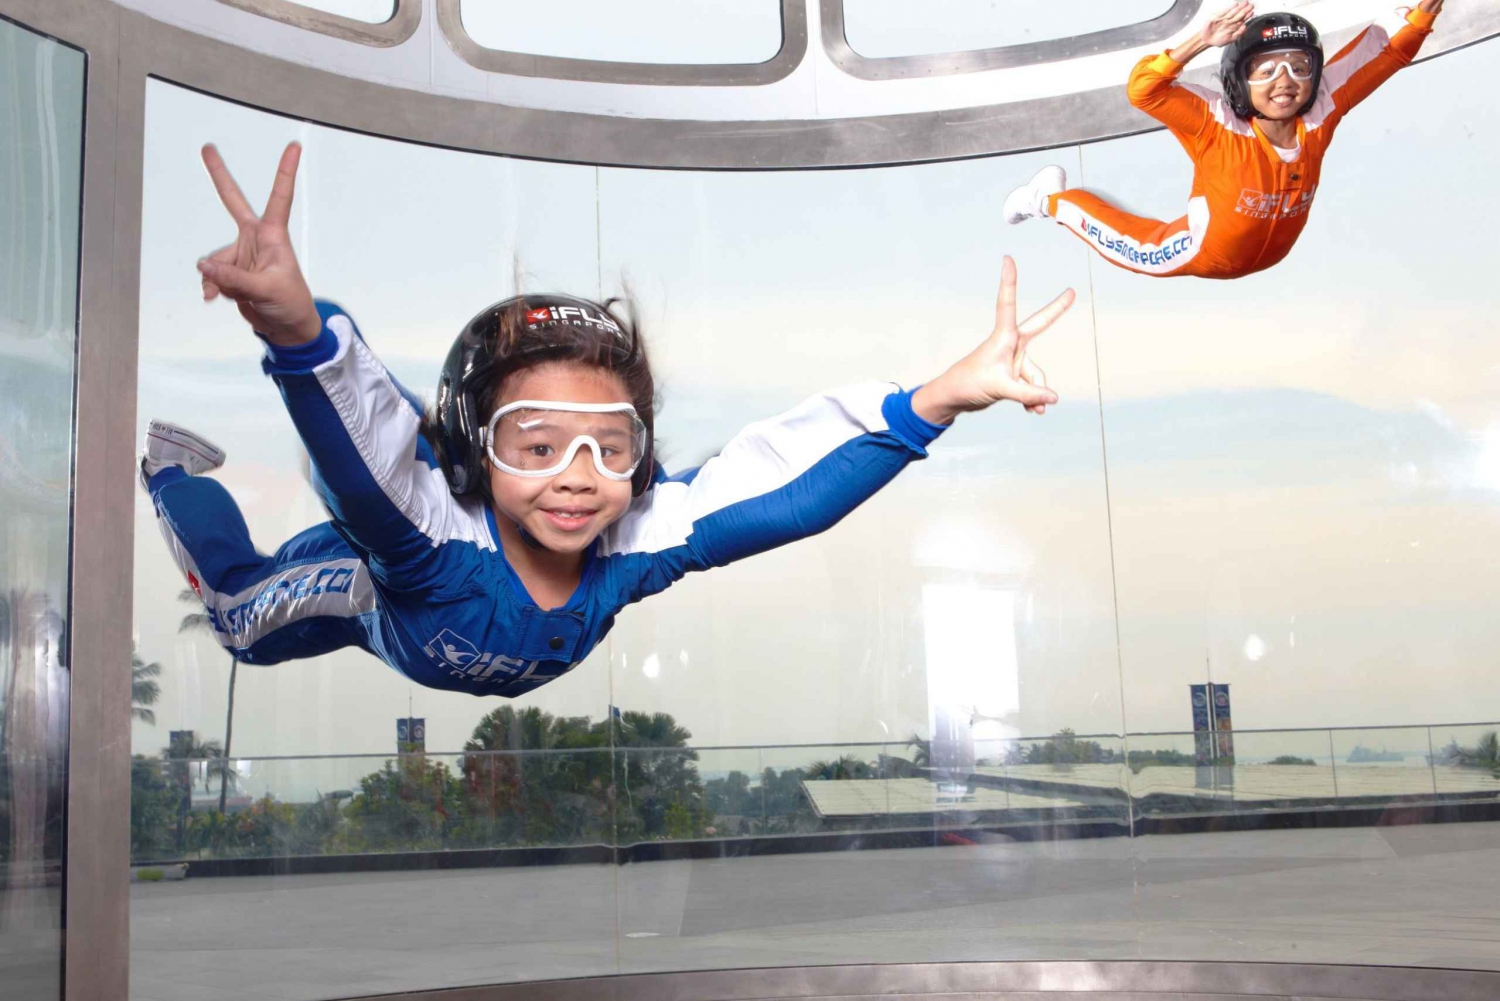 Singapore: iFly Singapore Ticket for 2 Skydives